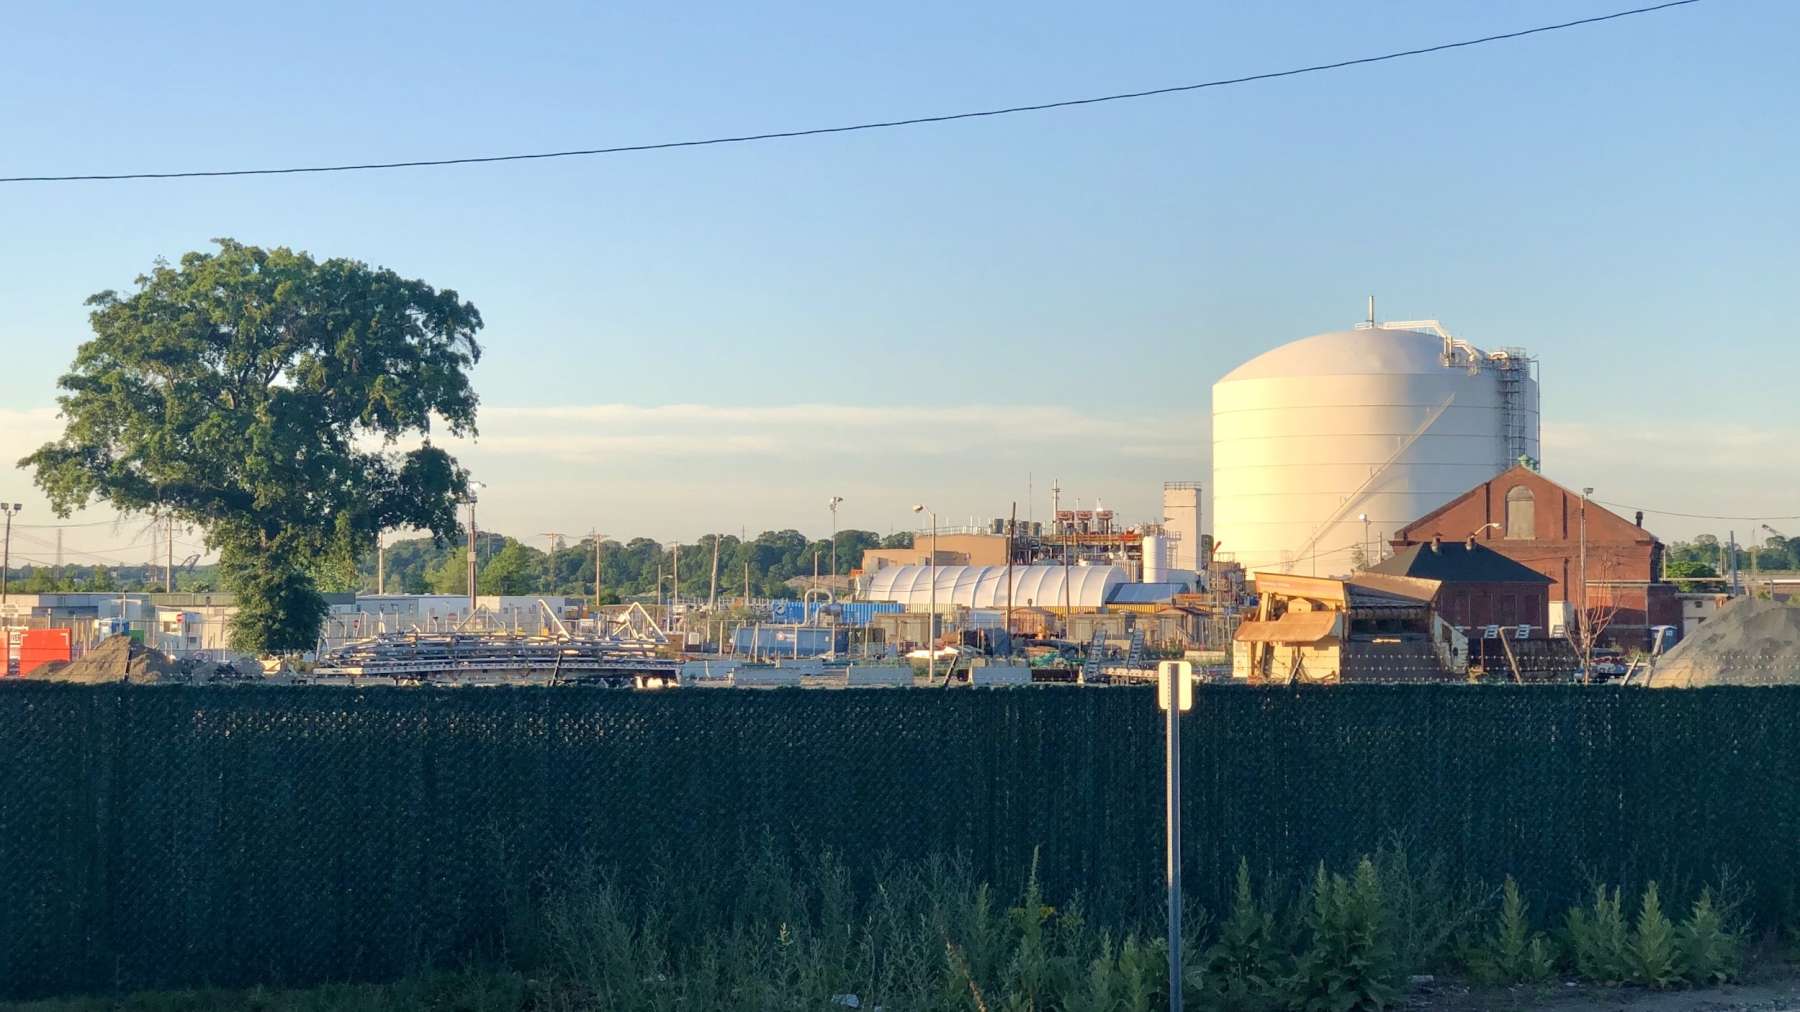 ProvPort lease renewal appears to be fast tracked to avoid negative public input